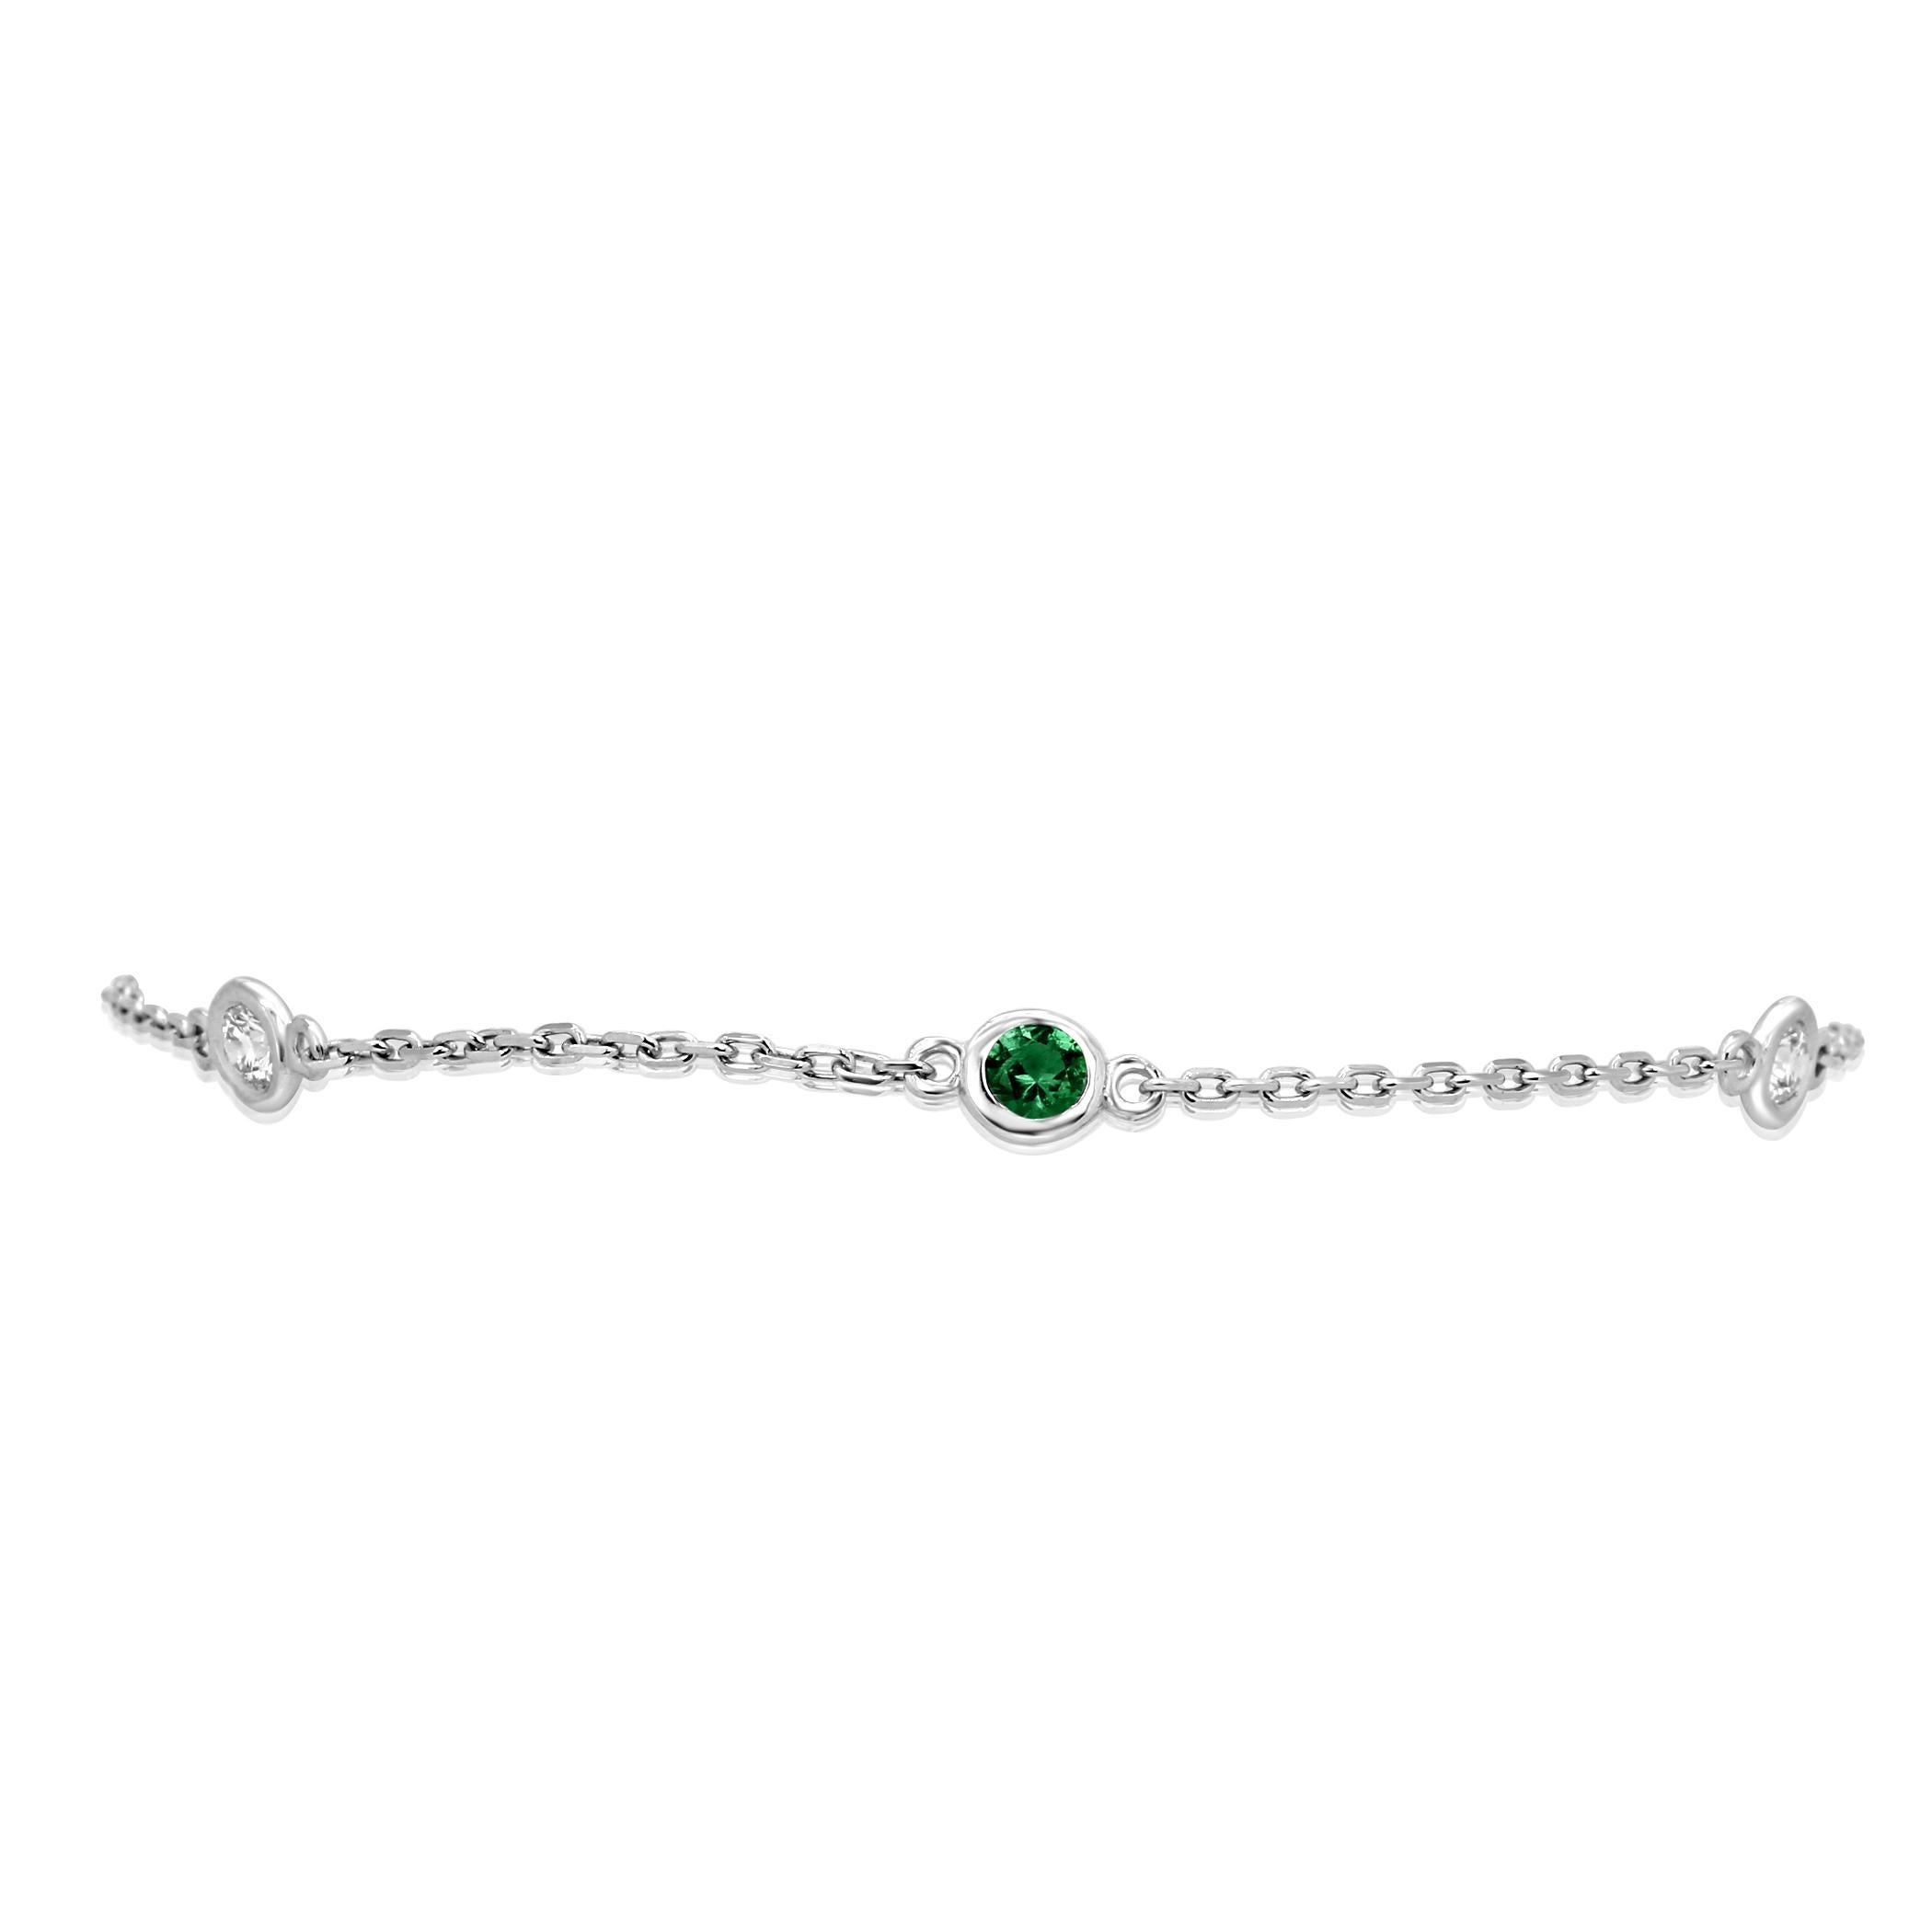 Emerald Rounds 0.30 Carat and White Diamond Rounds 0.17 Carat in Bezel set Diamond By Yard Style Bracelet and Anklet in 14K White Gold.

MADE IN USA
Emerald Weight 0.30 Carat
Total Weight 0.47 Carat